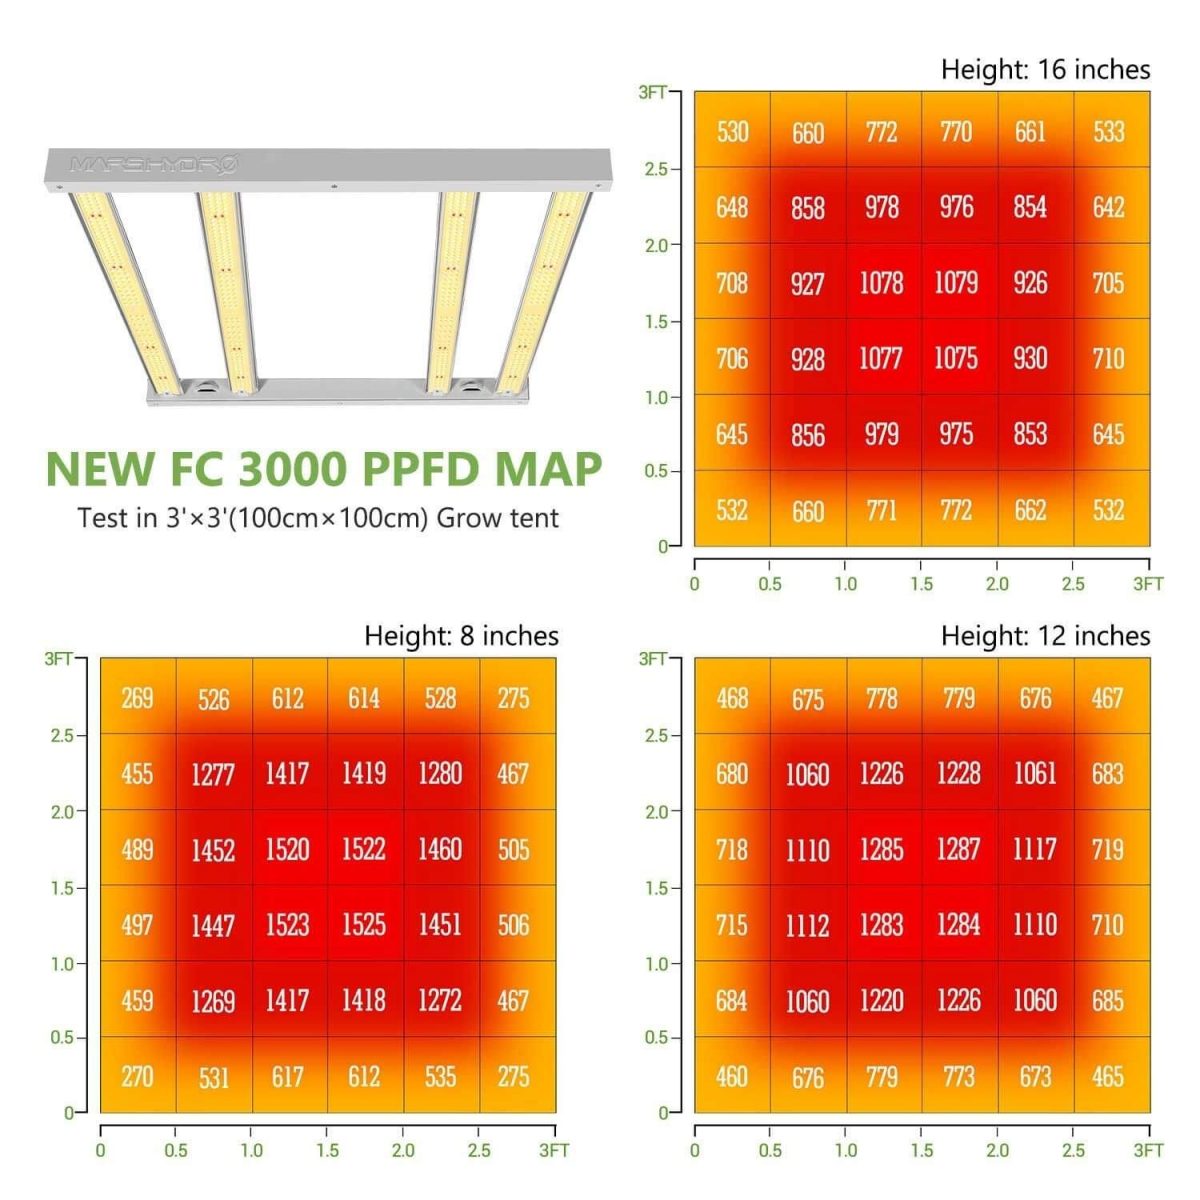 Two PPFD maps of the FC3000 LED grow light tested in a 3'x3' grow tent at 8 inches for co2-added growth and at 10 inches without co2 added.